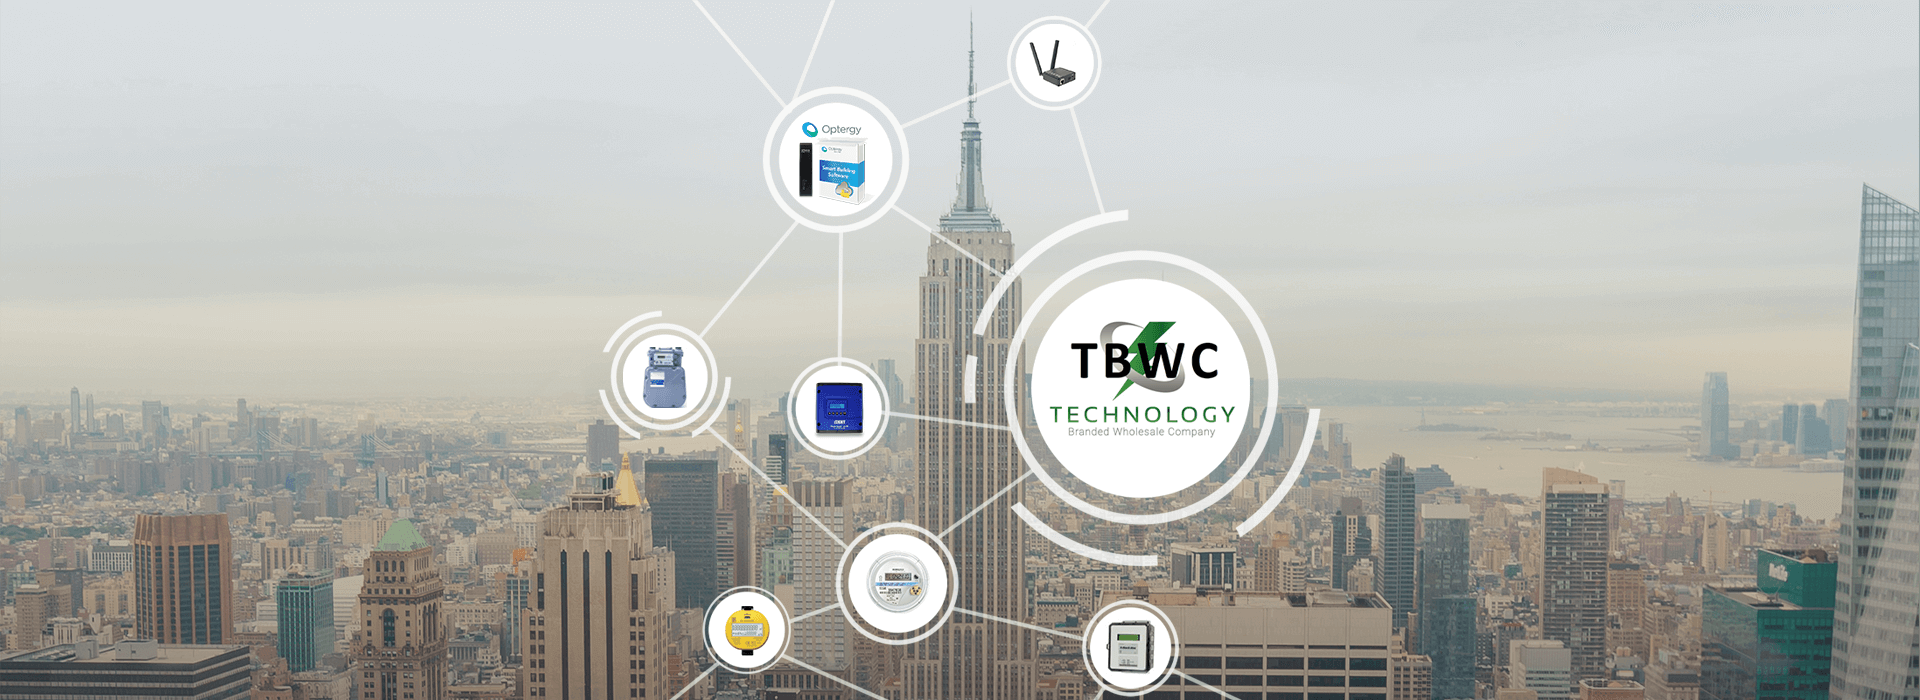 TBWC Inc. | UTILITY SUBMETERING & ENERGY MANAGEMENT PRODUCT SOLUTIONS